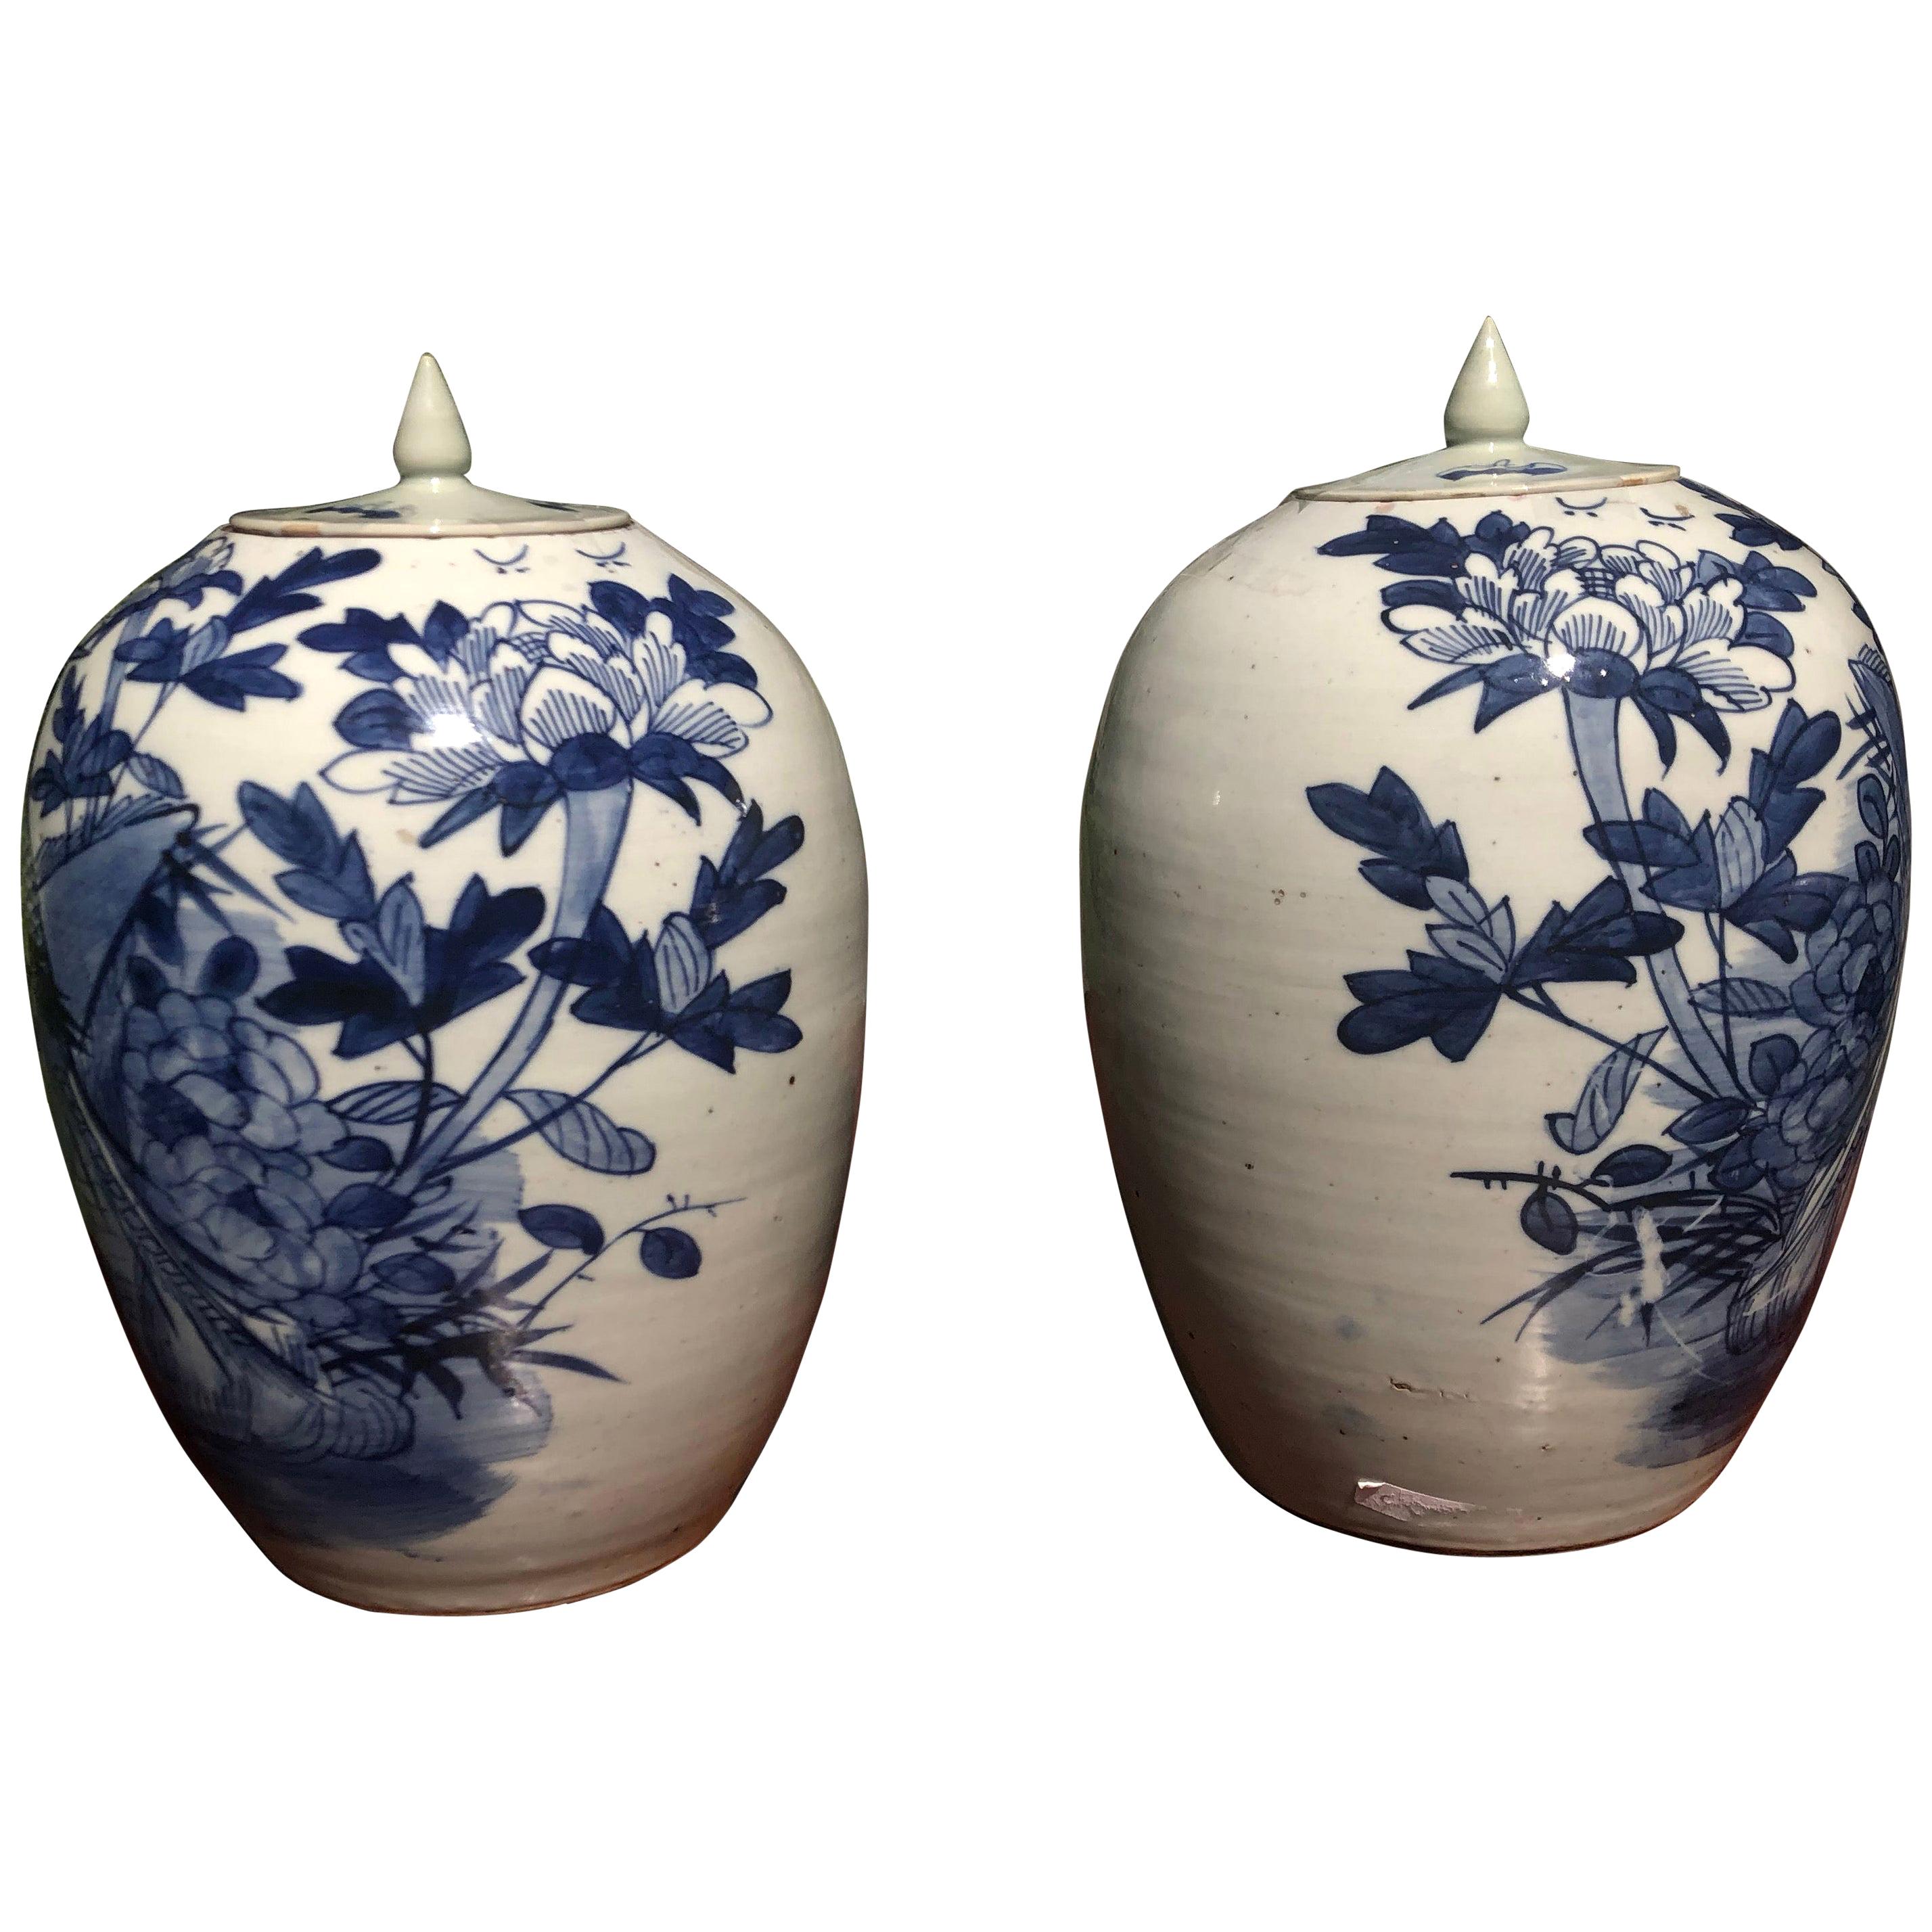 Chinese Blue and White Porcelain Ginger Jar High with Lid, Late 12th Century